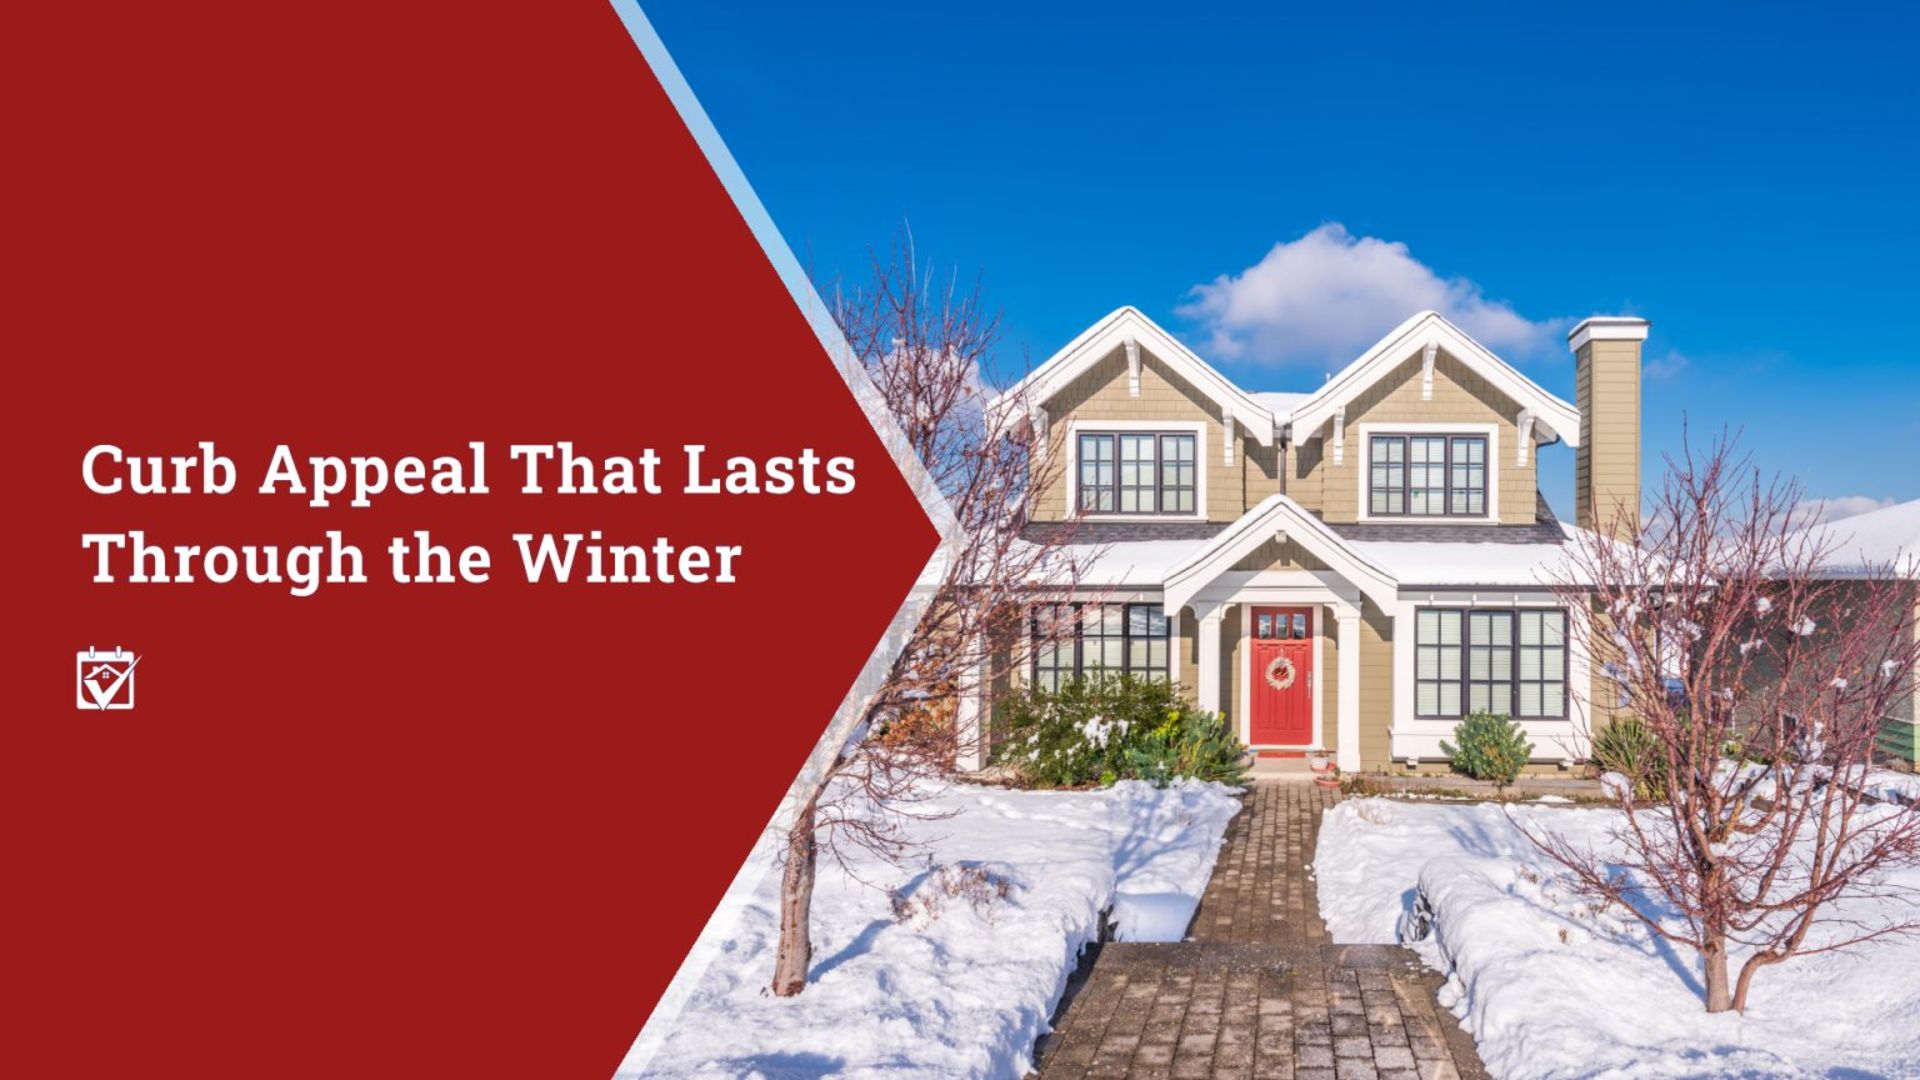 Curb Appeal That Lasts Through the Winter